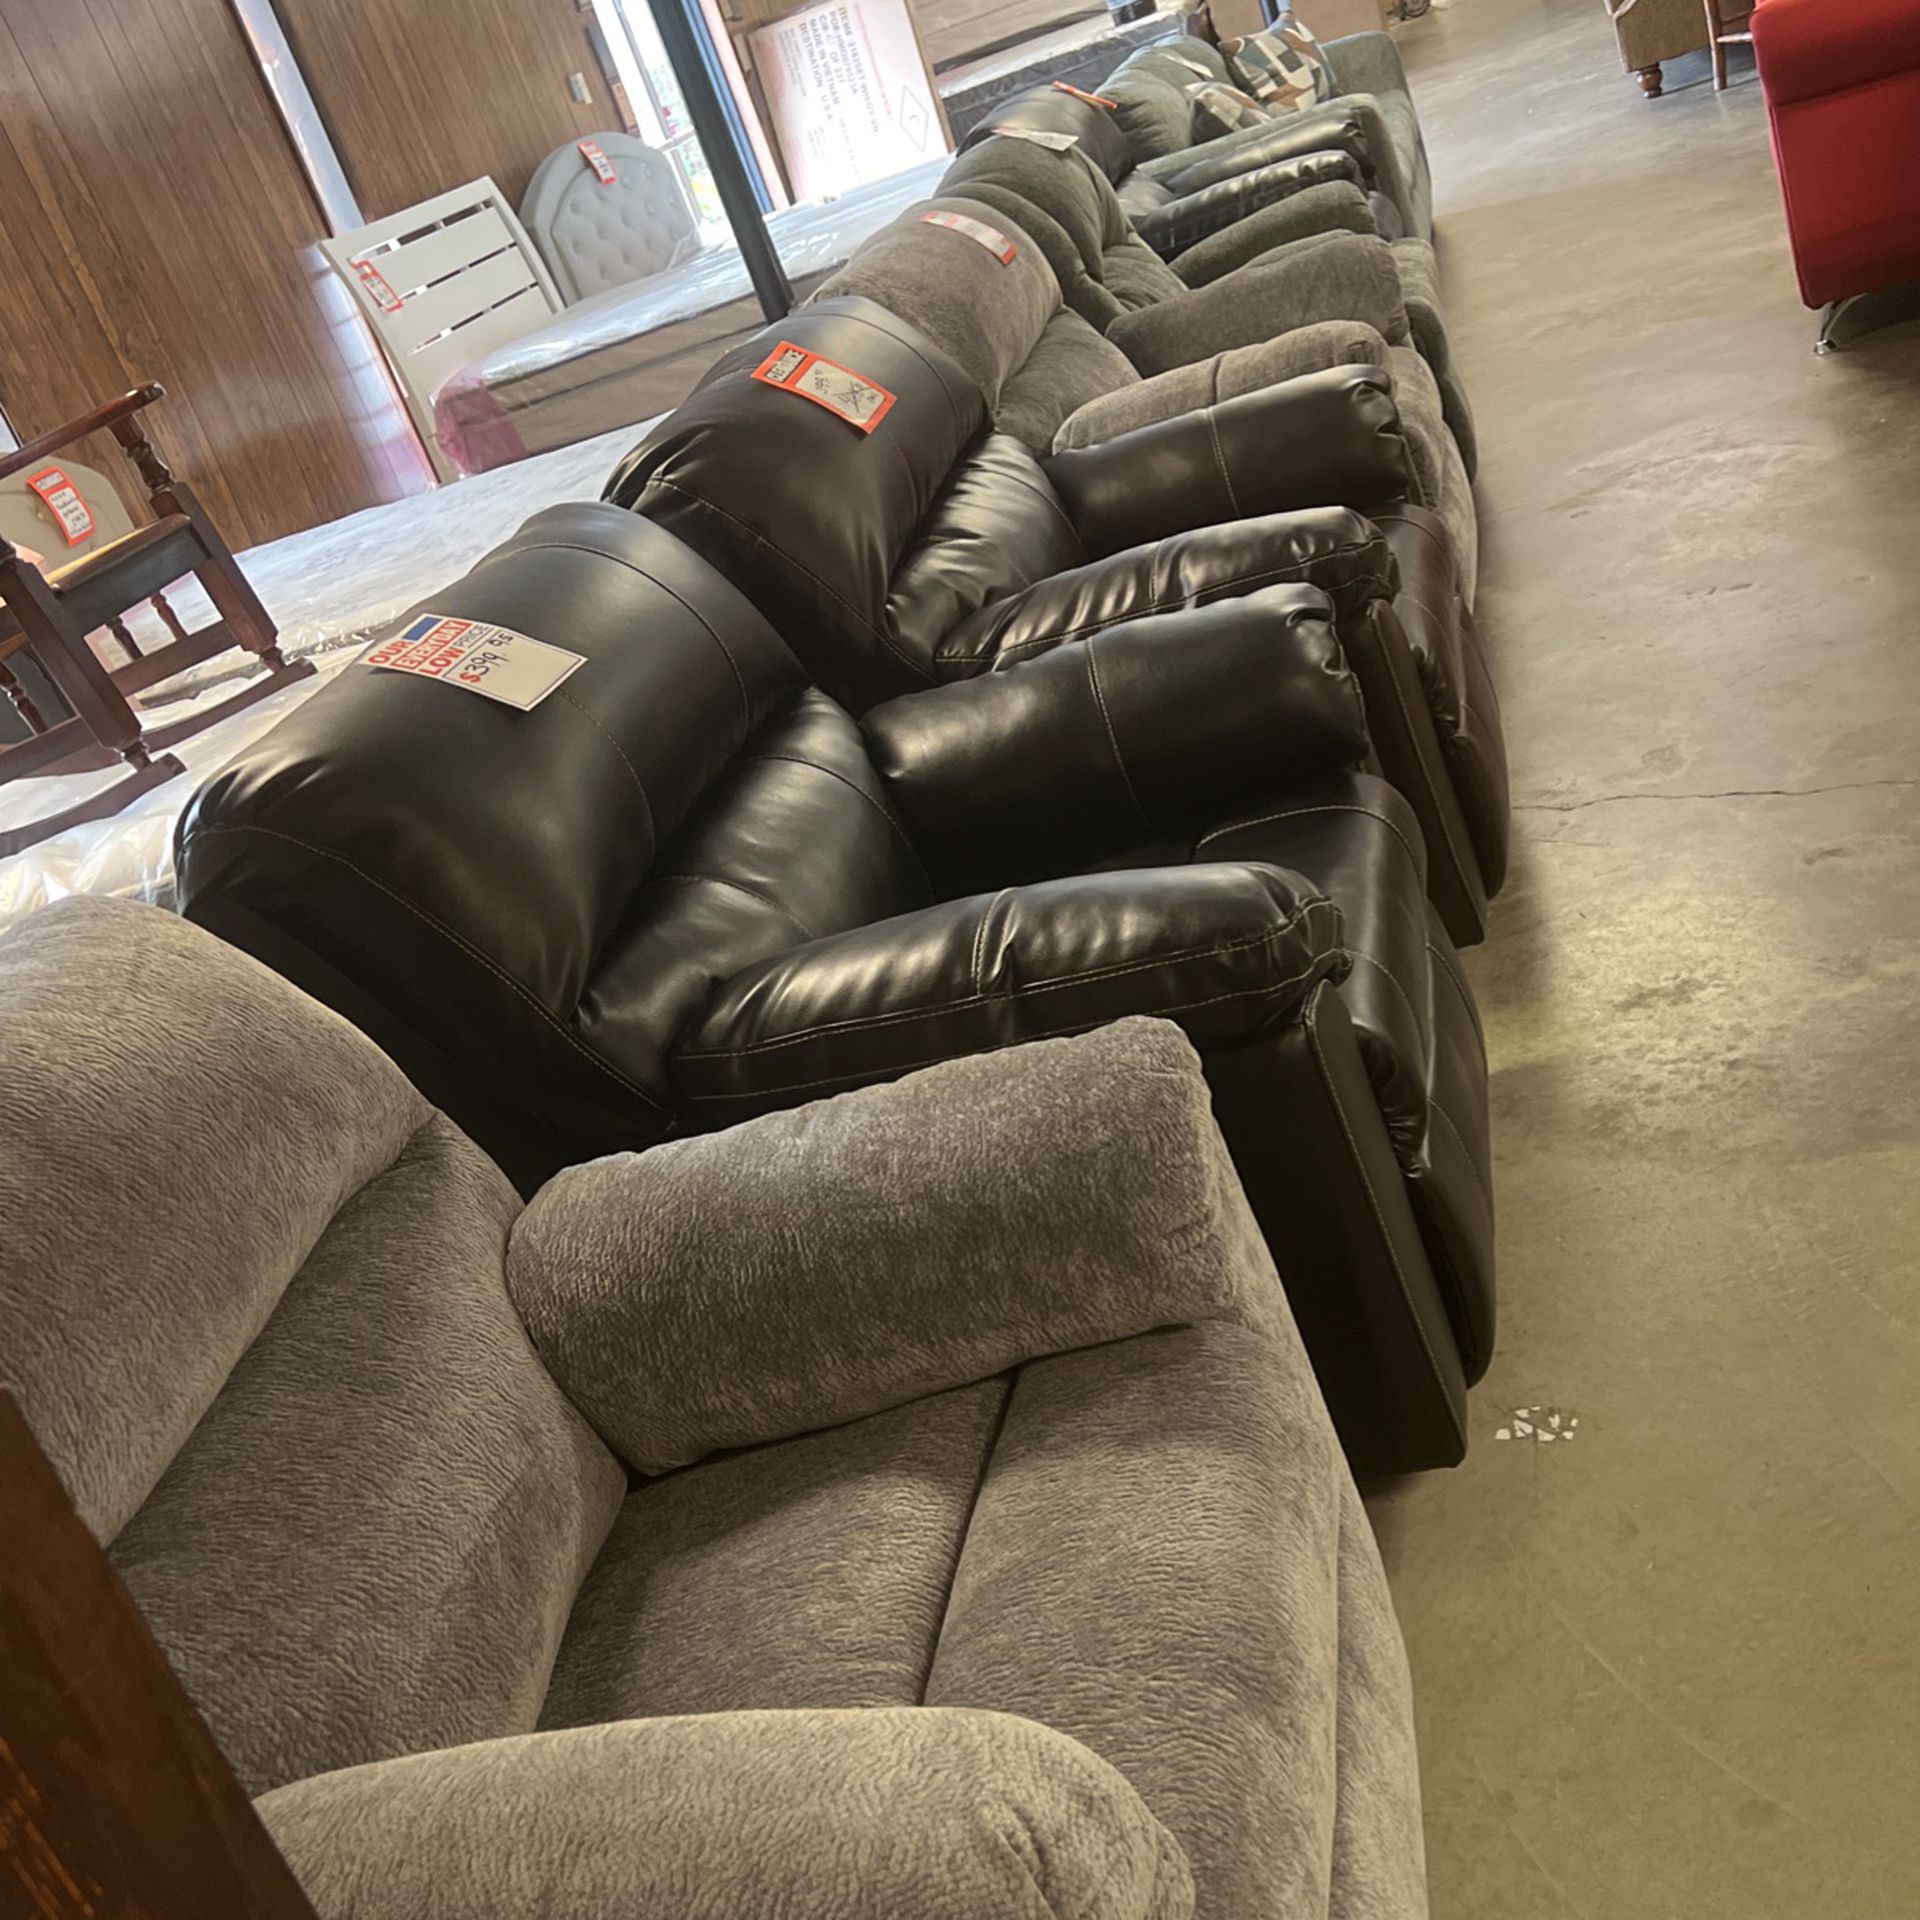 Brand new recliners for 399 each